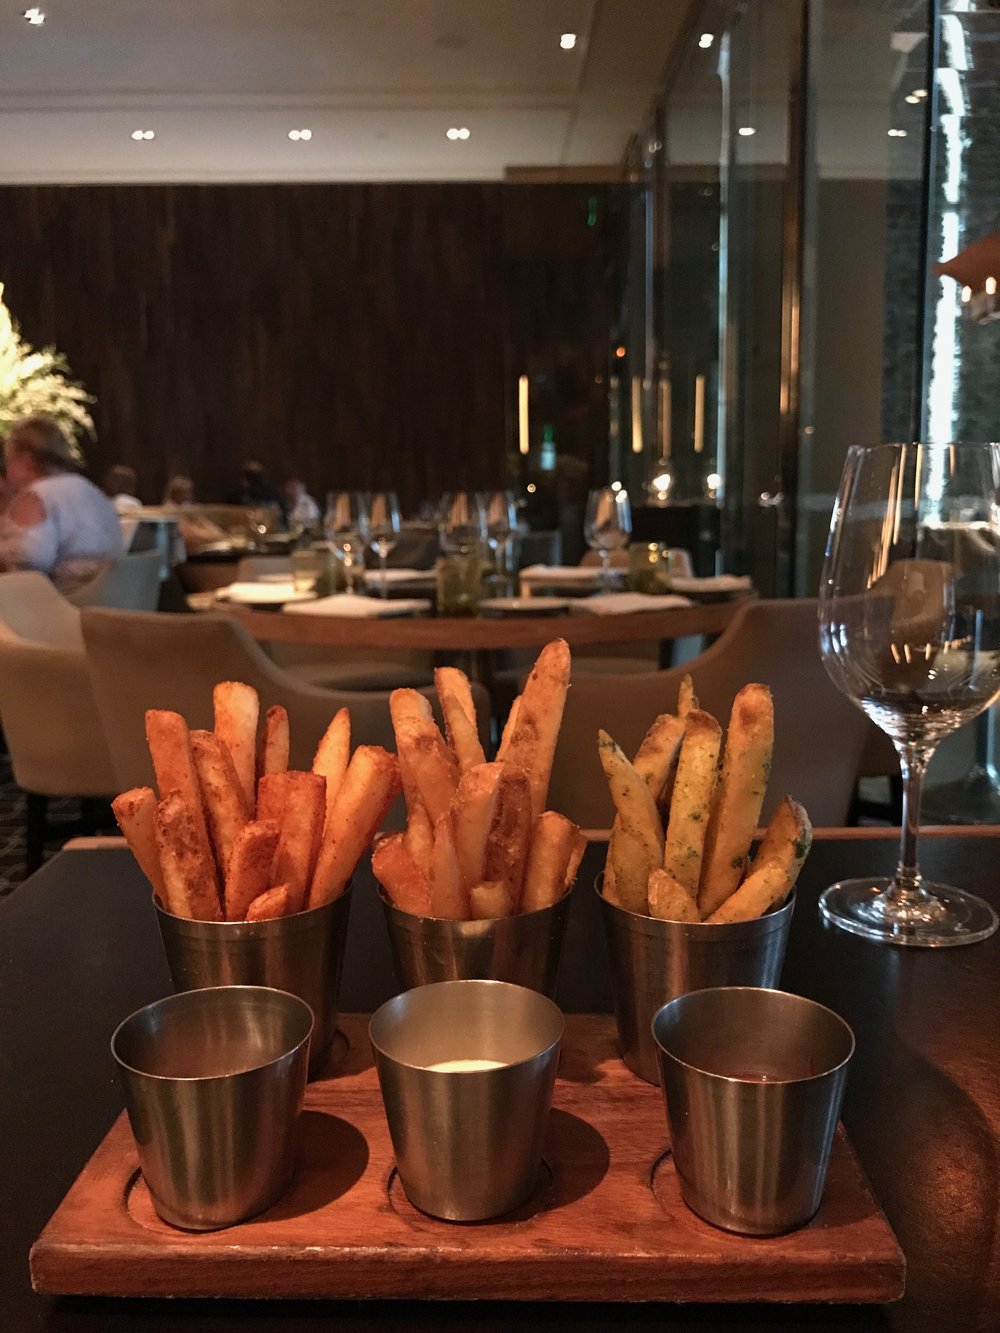 Assortment of French fries at Michael Mina's Bourbon Steaks at Turnberry Isle Miami. Insane.